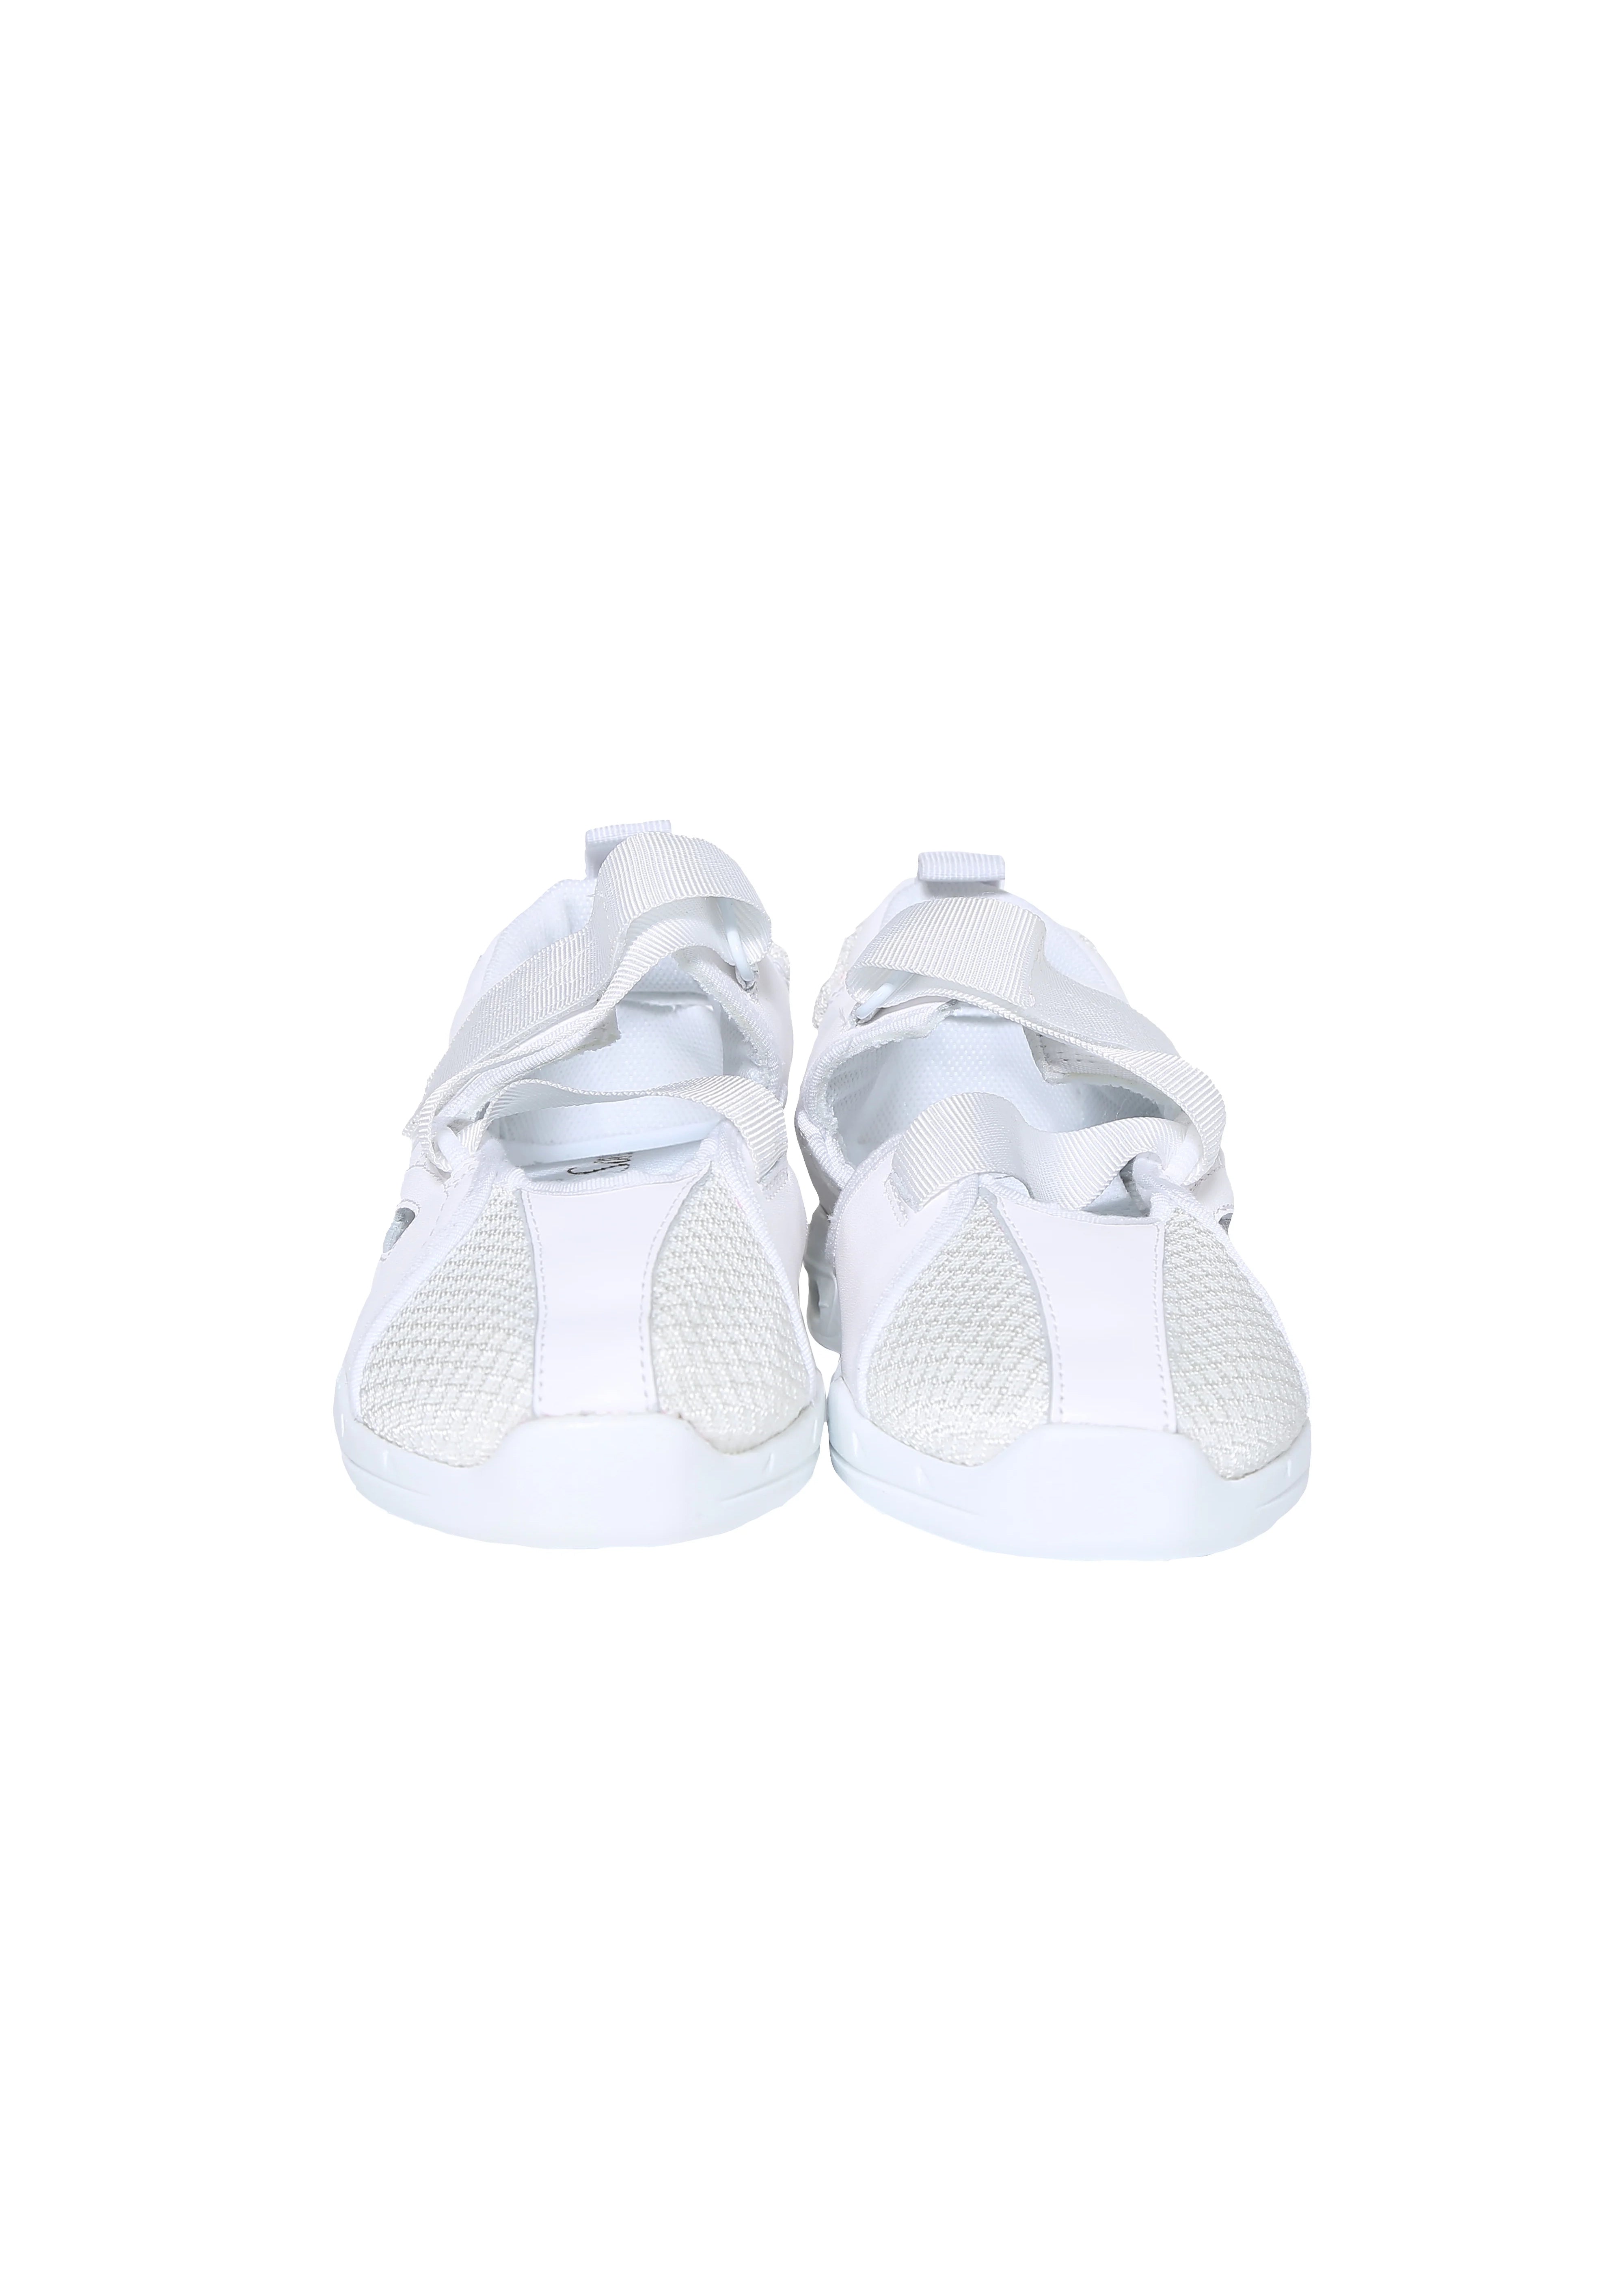 Foundrymews / White canvas shoes